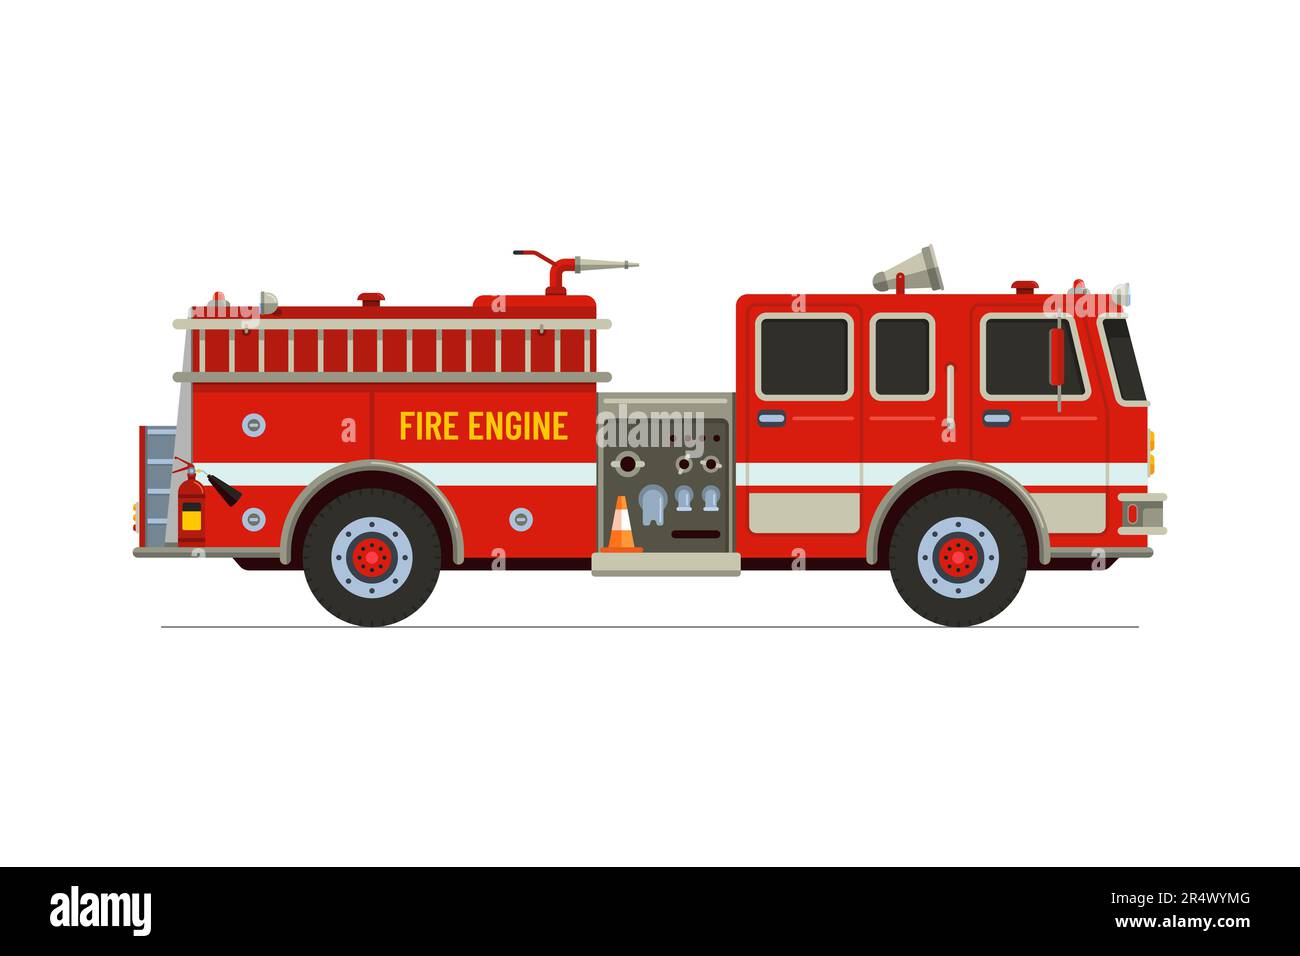 Fire engine truck front view. Firetruck car with Siren alarm and